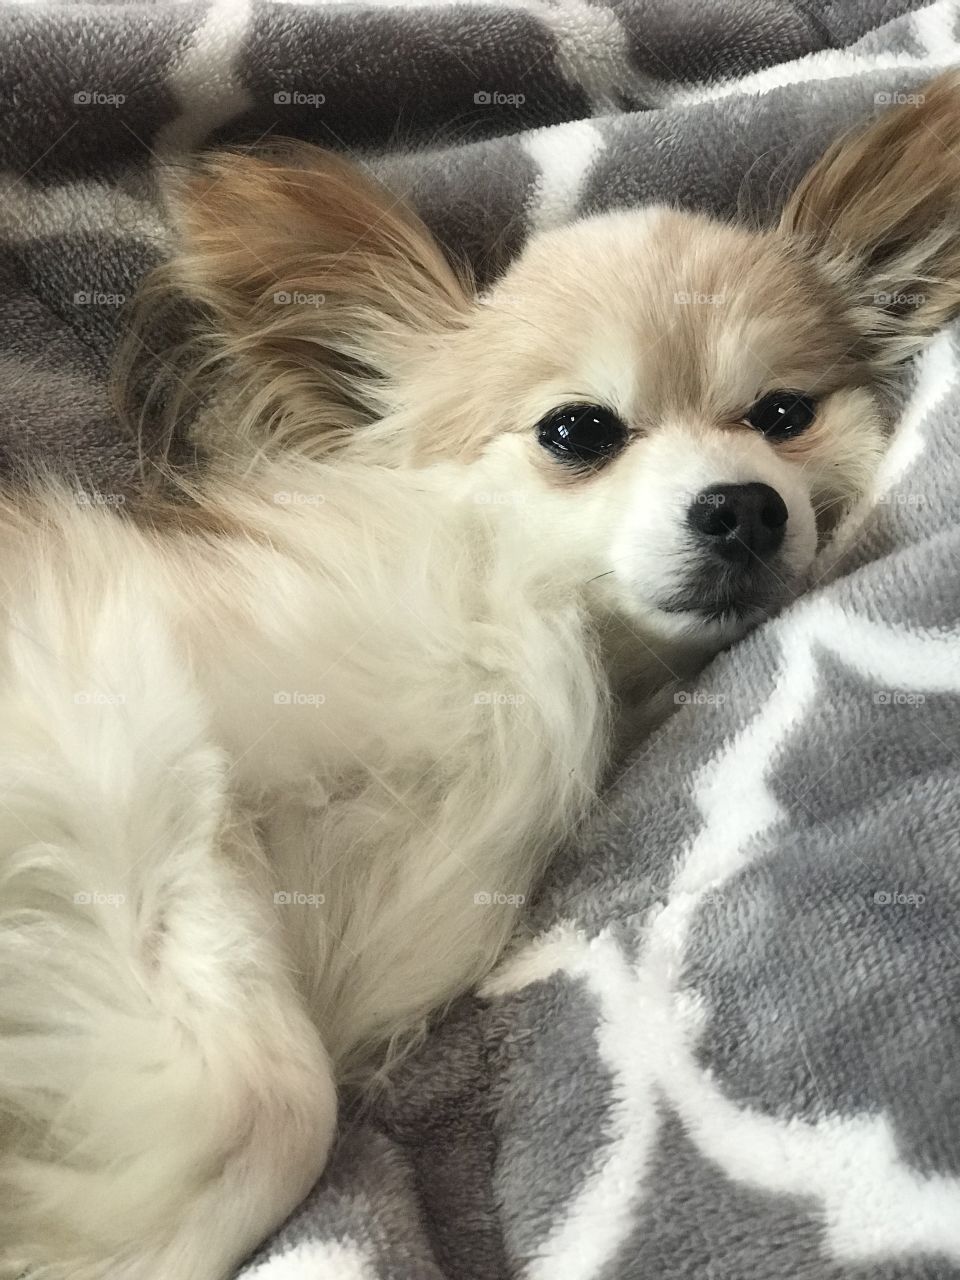 Our sleepy, cuddly Papillon, Roxy, always makes her “nest” in the cutest locations. 